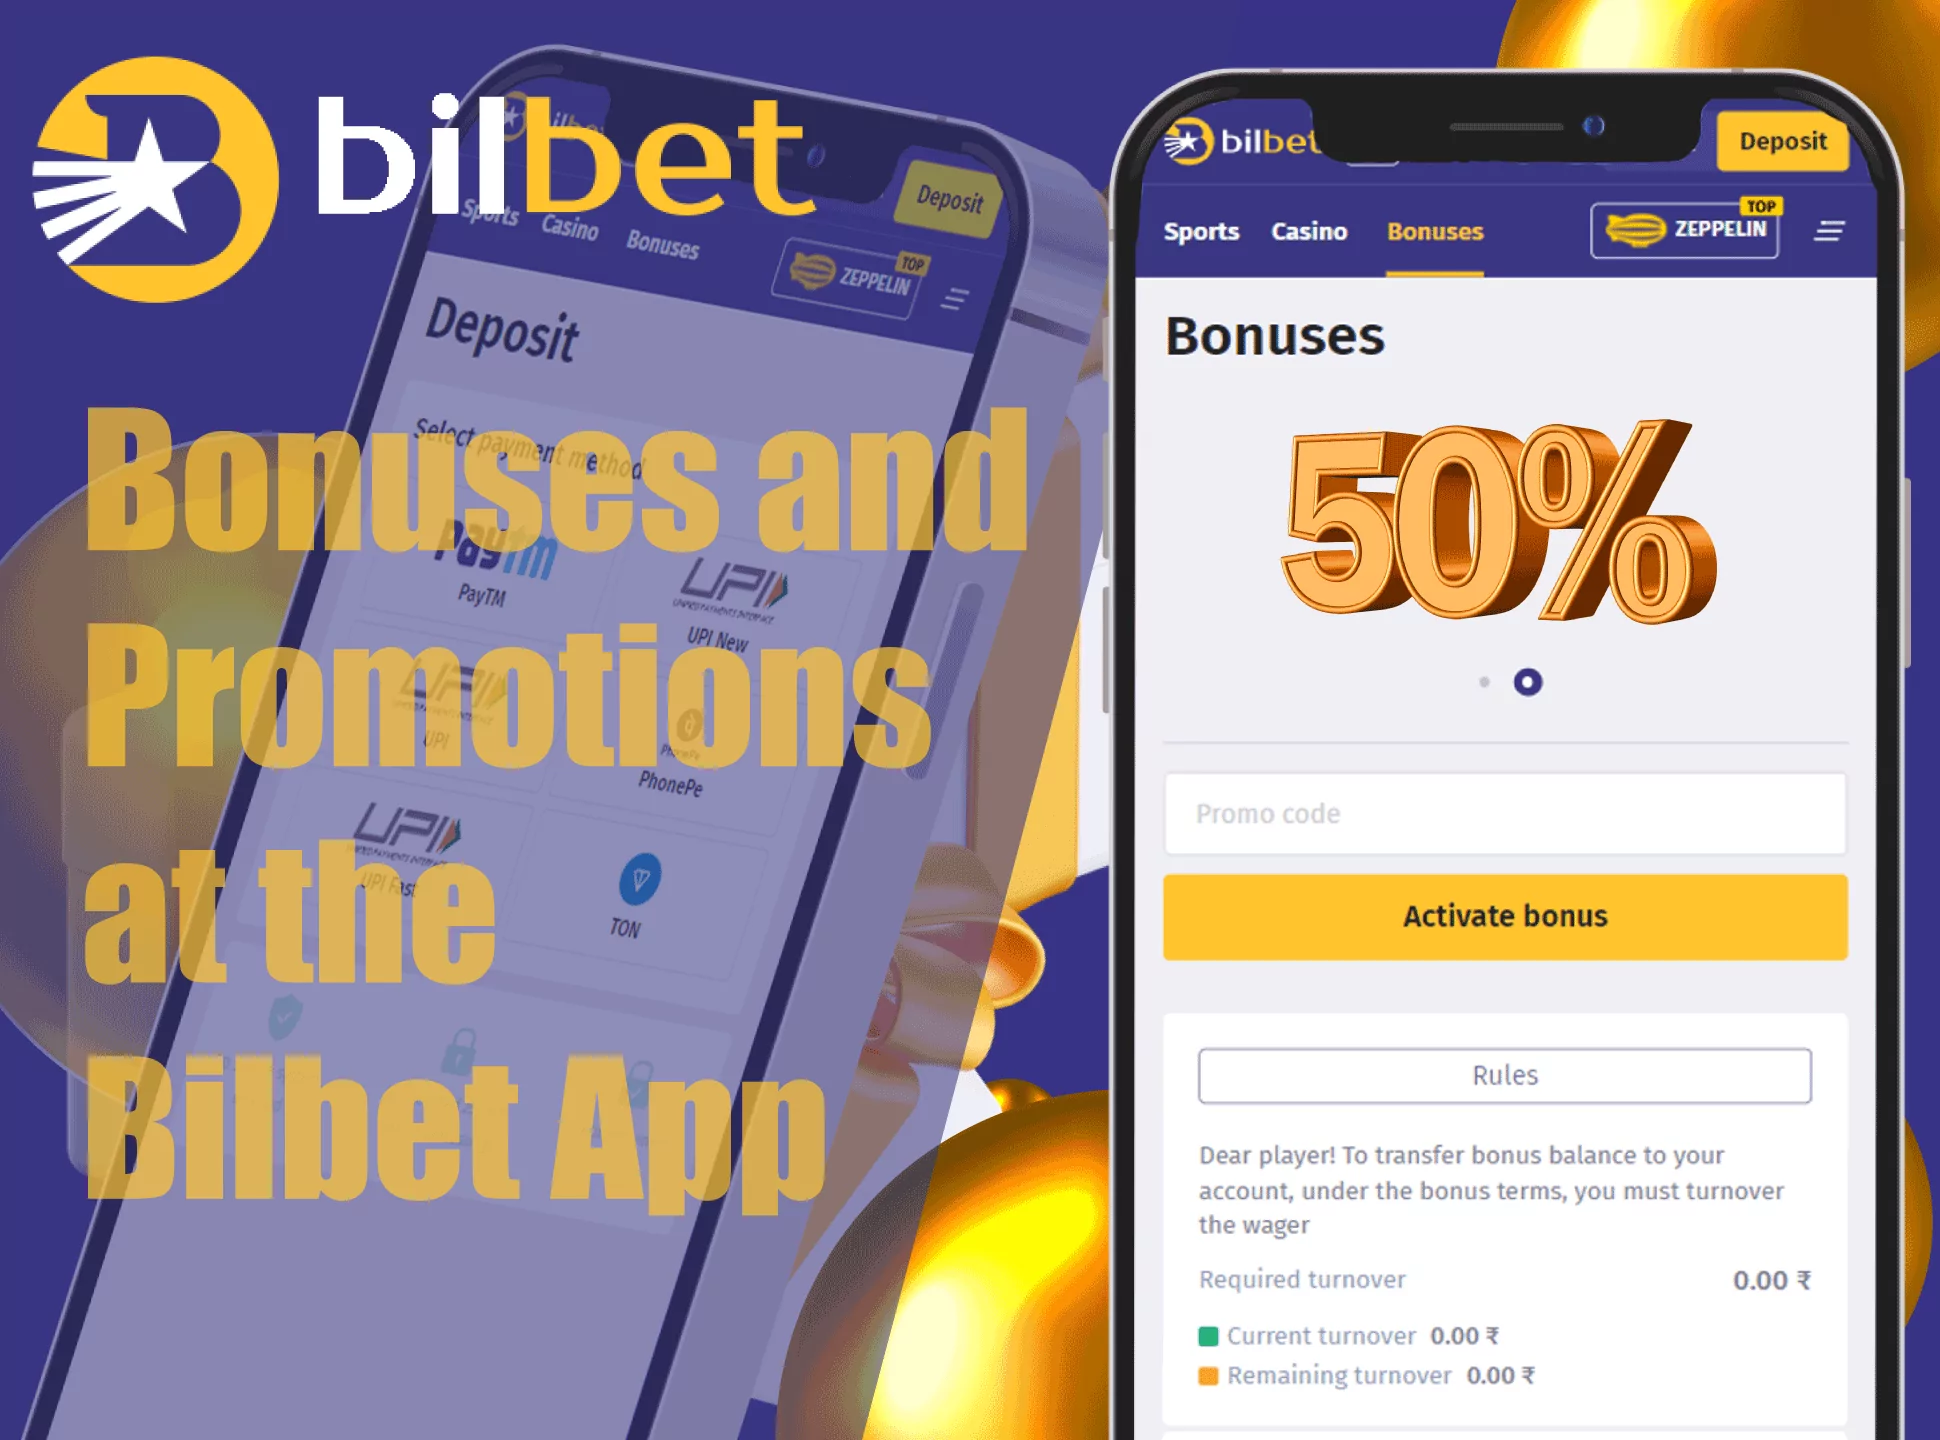 Download the Bilbet application and find bonuses for mobile users.